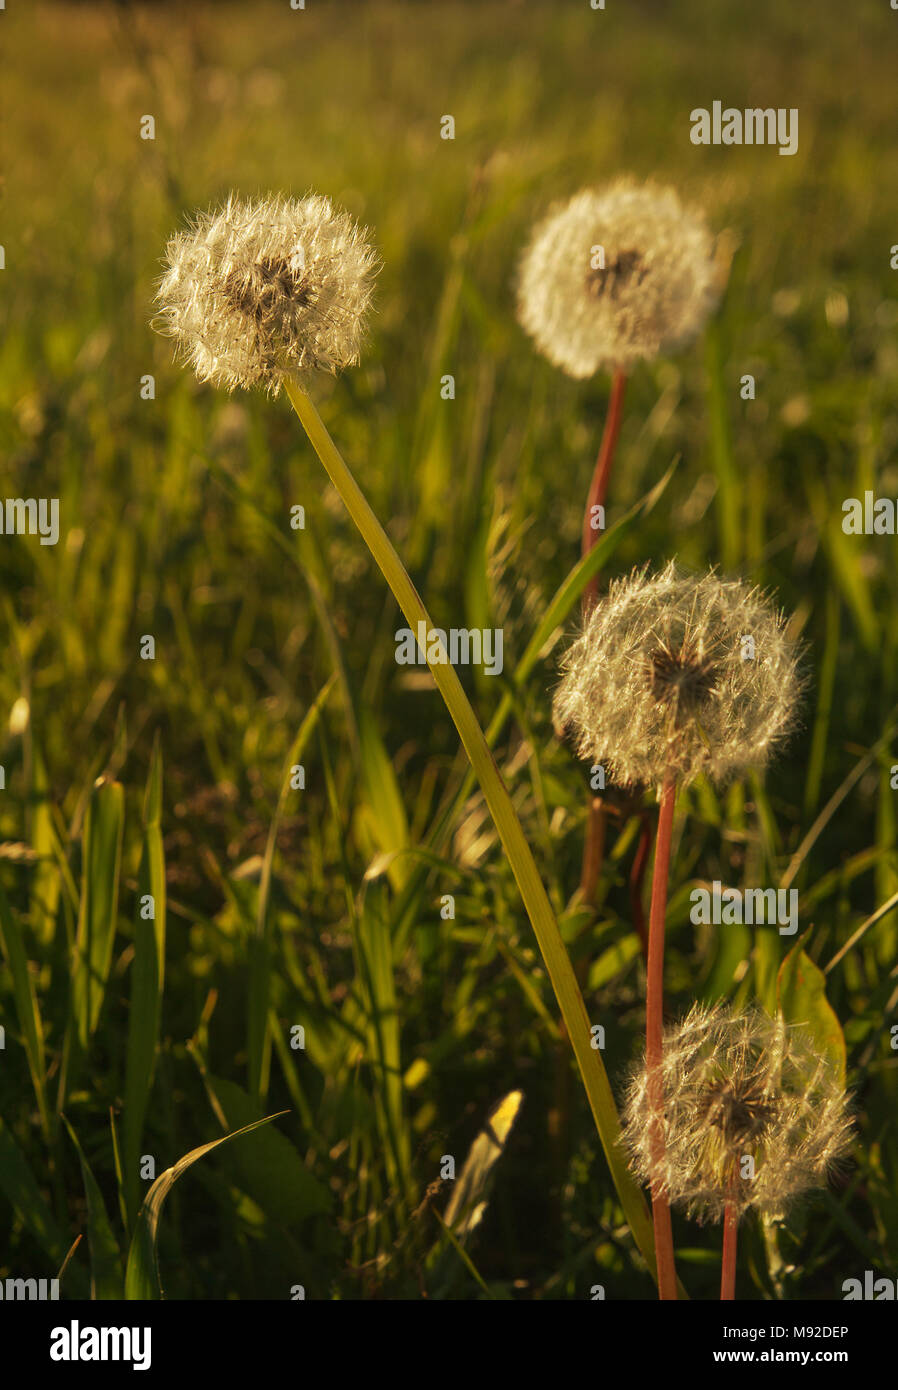 Seeds of dandelions in the warm light of the setting sun Stock Photo